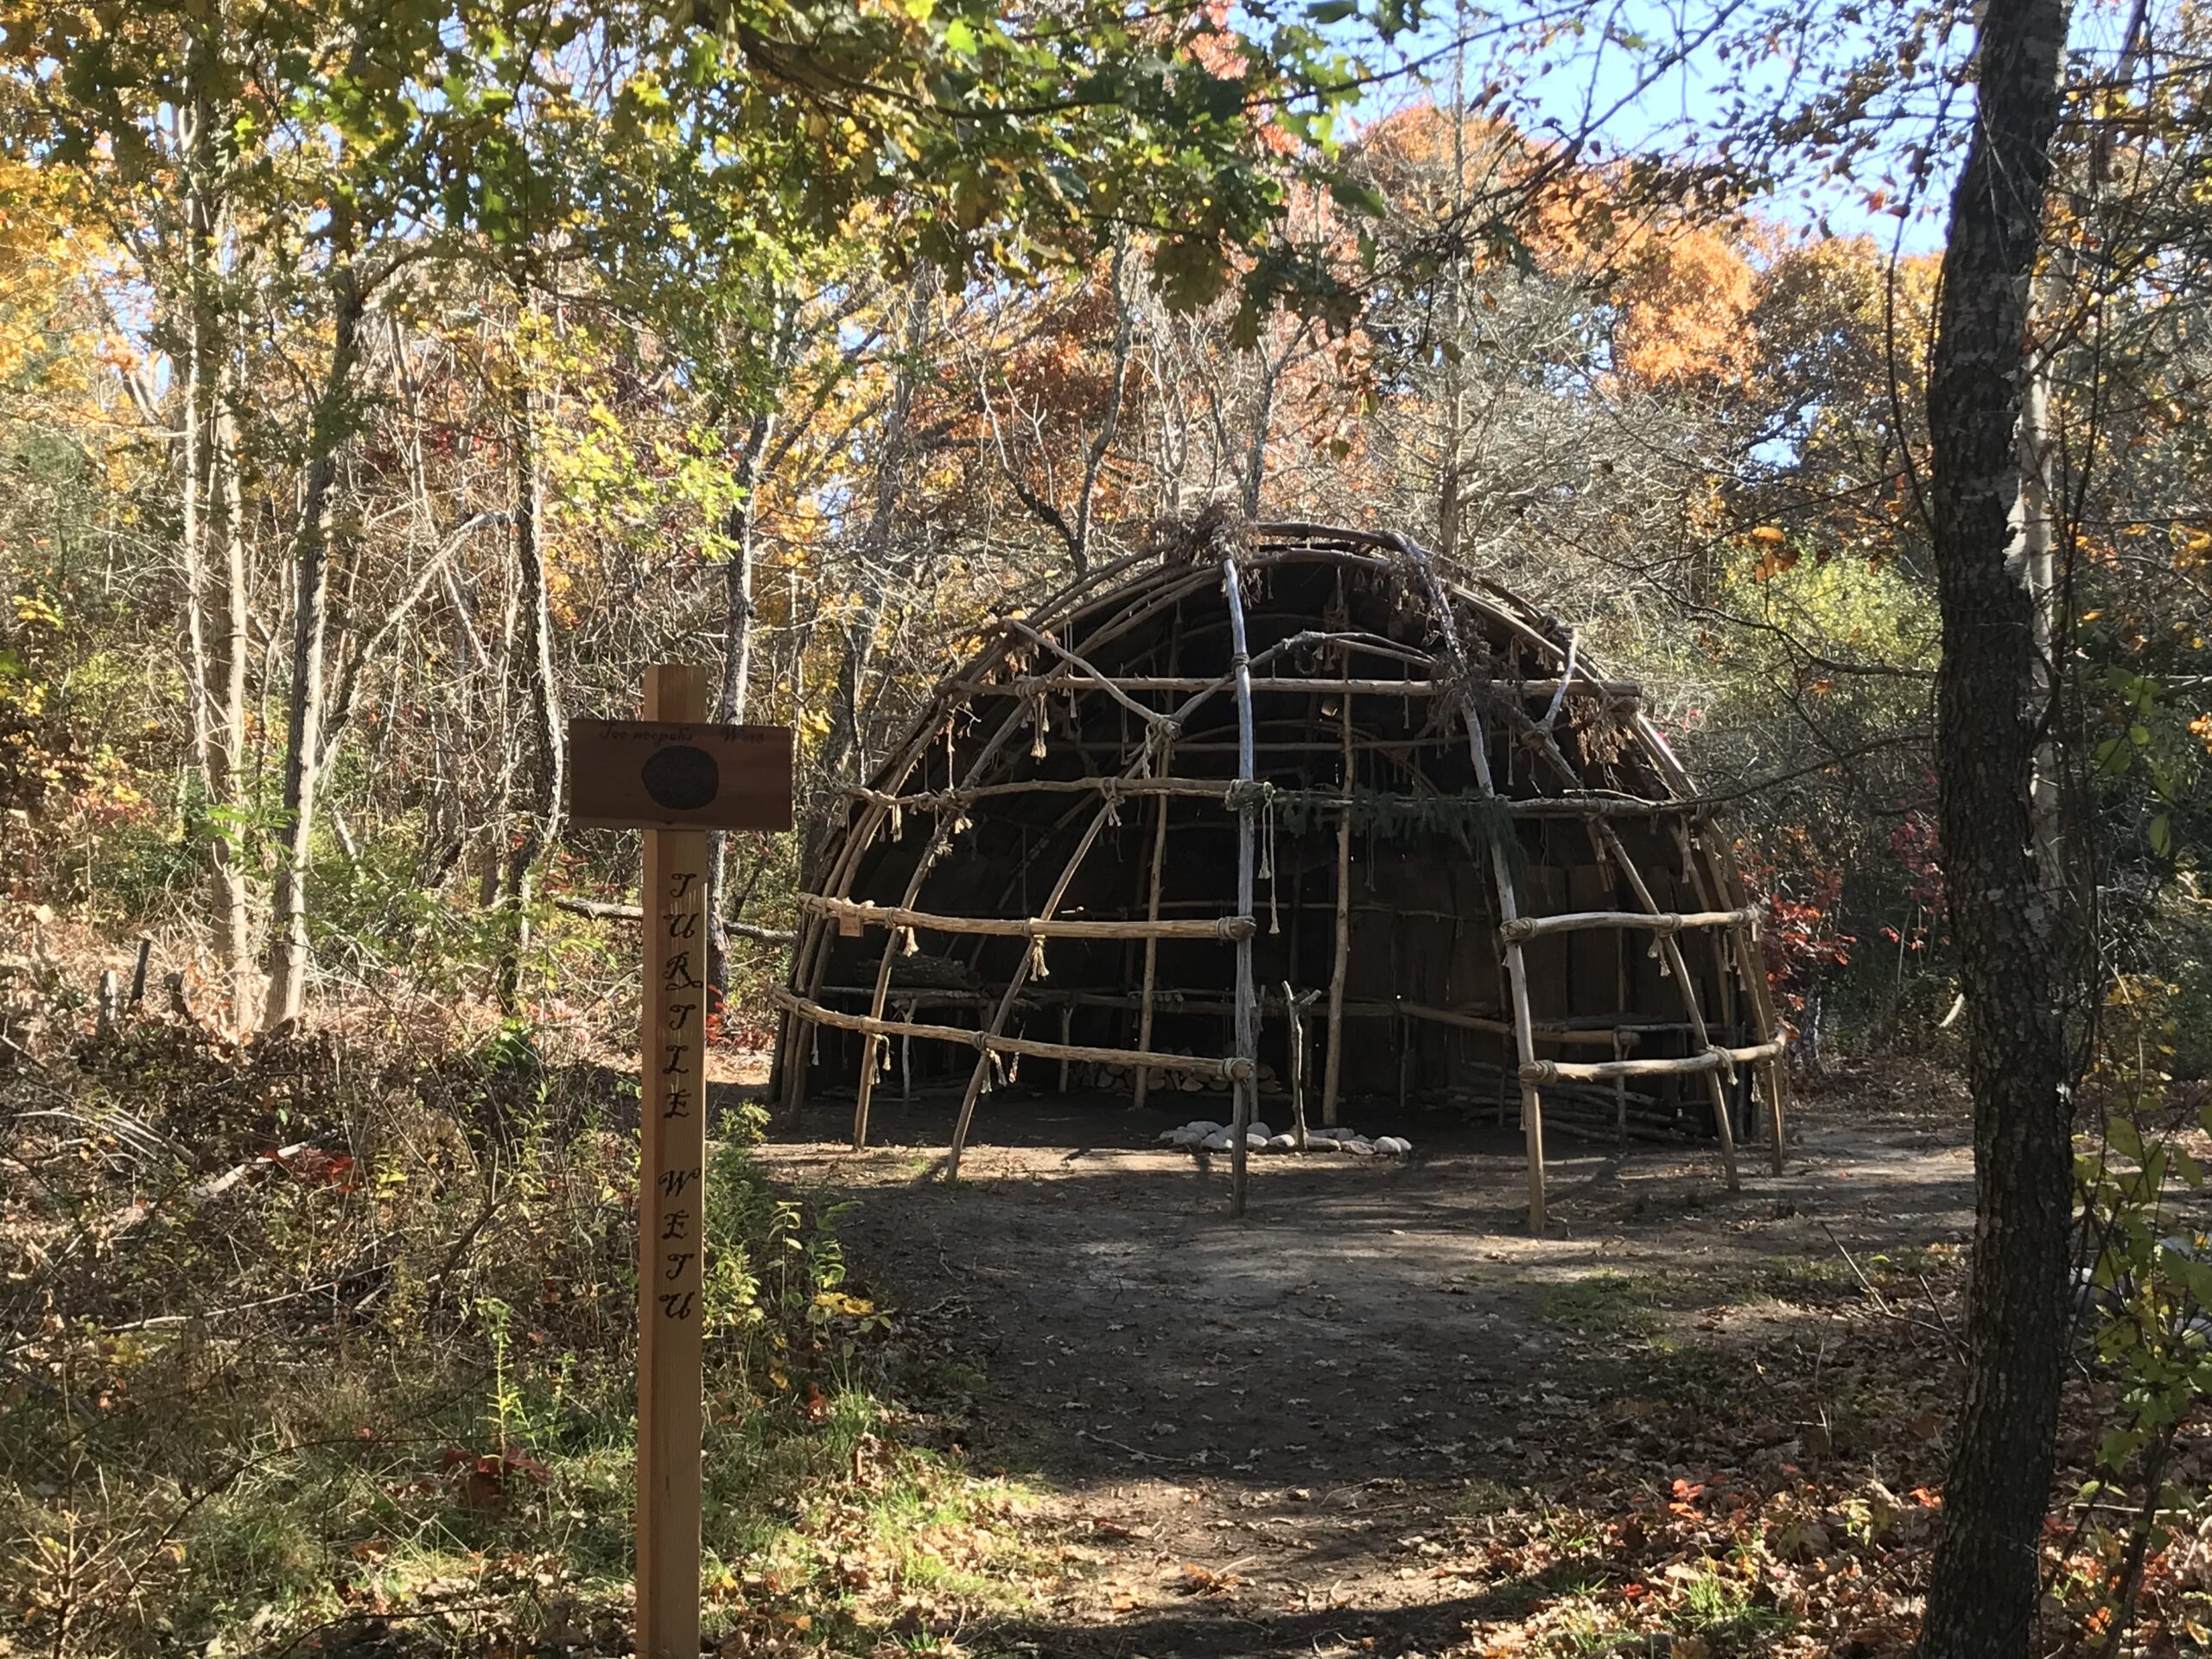 Reconstruction of an indigenous wetu. Structure made of bent saplings covered with bark.